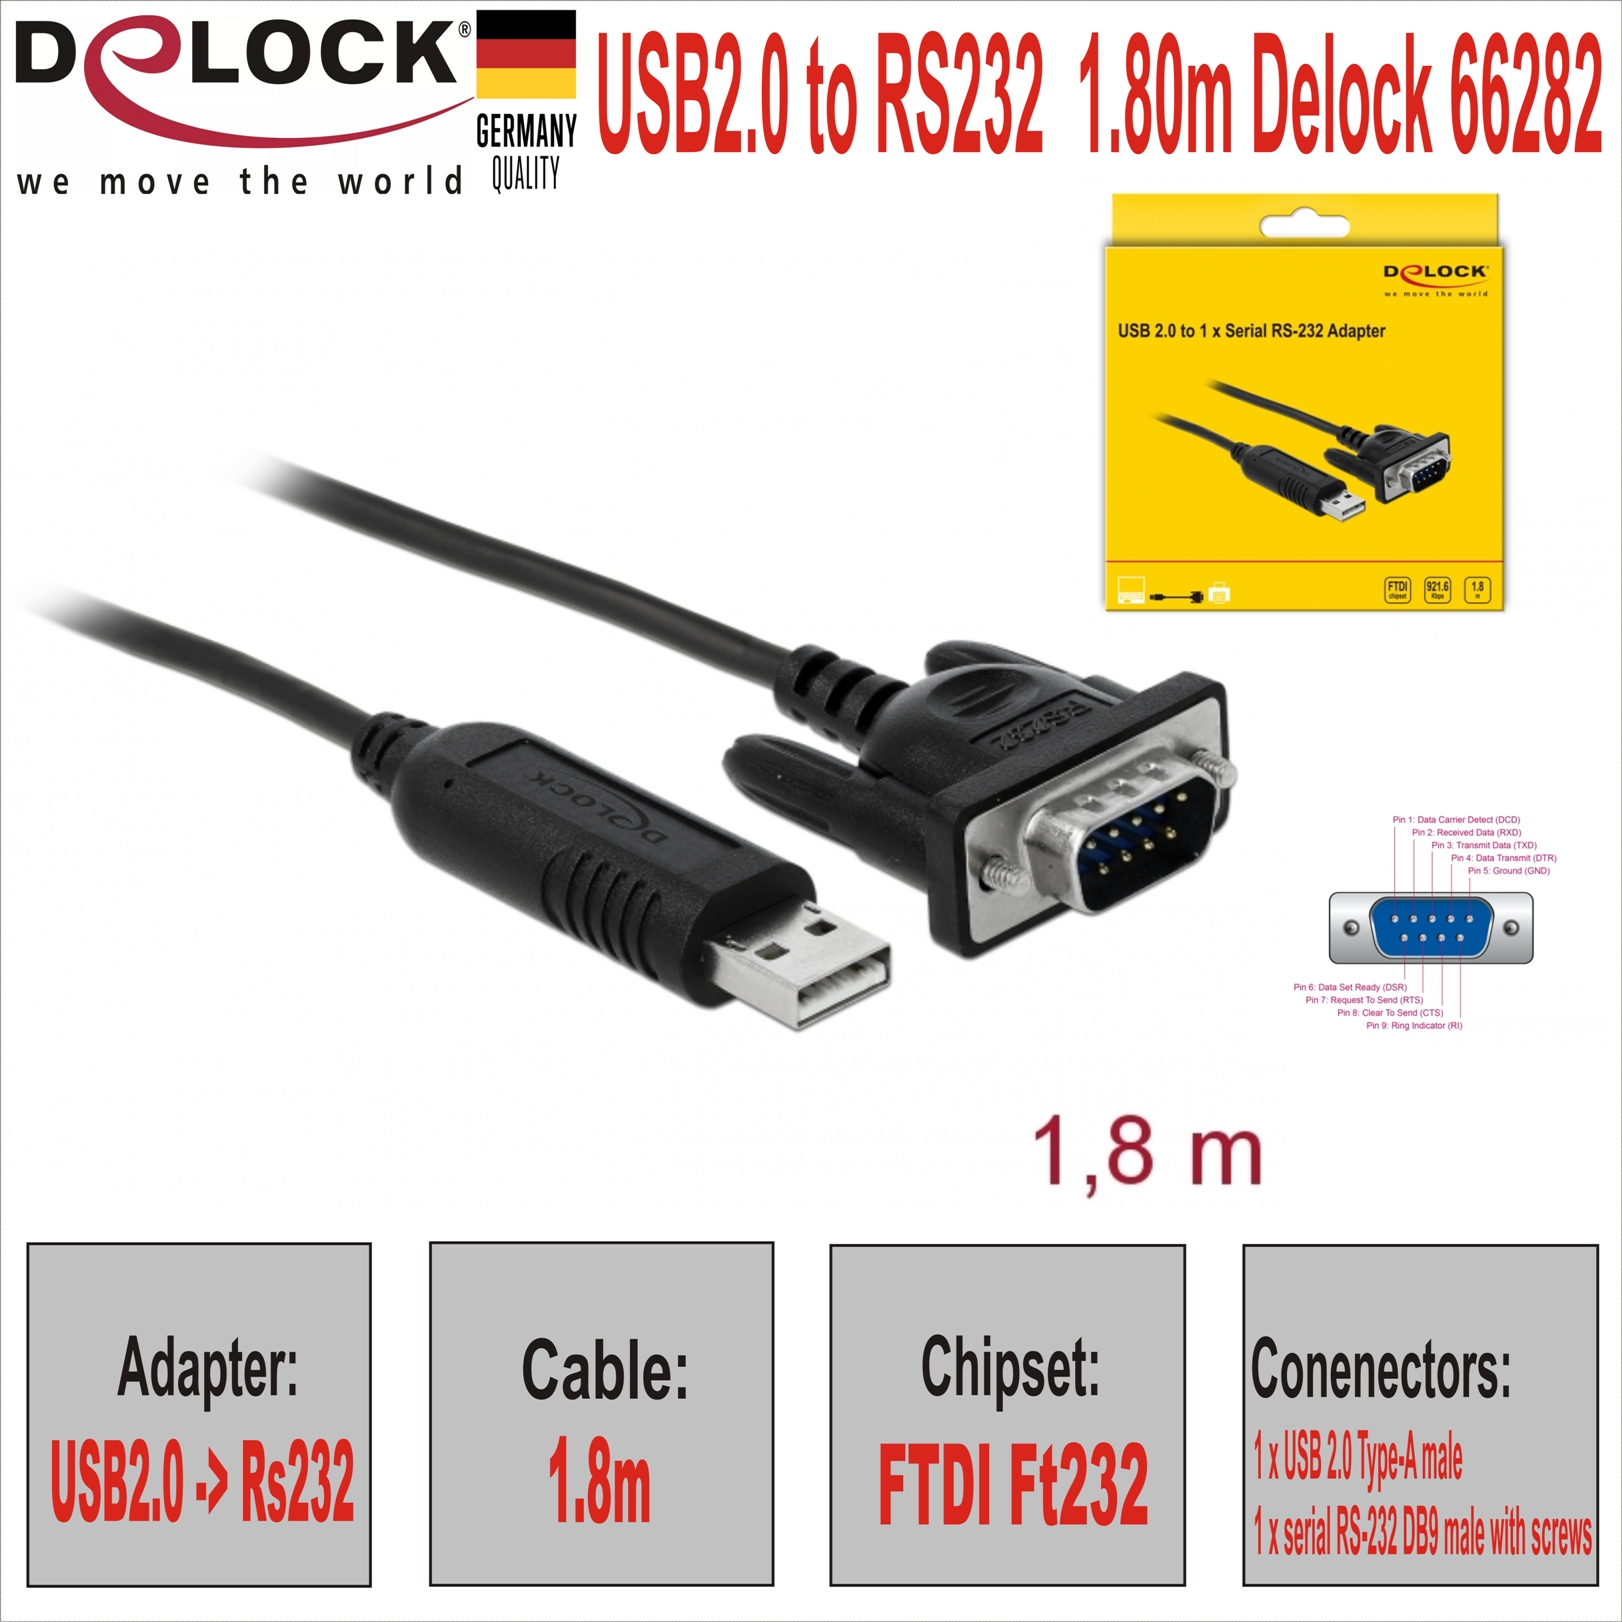 USB2.0 to RS232  1.8m Delock 66282